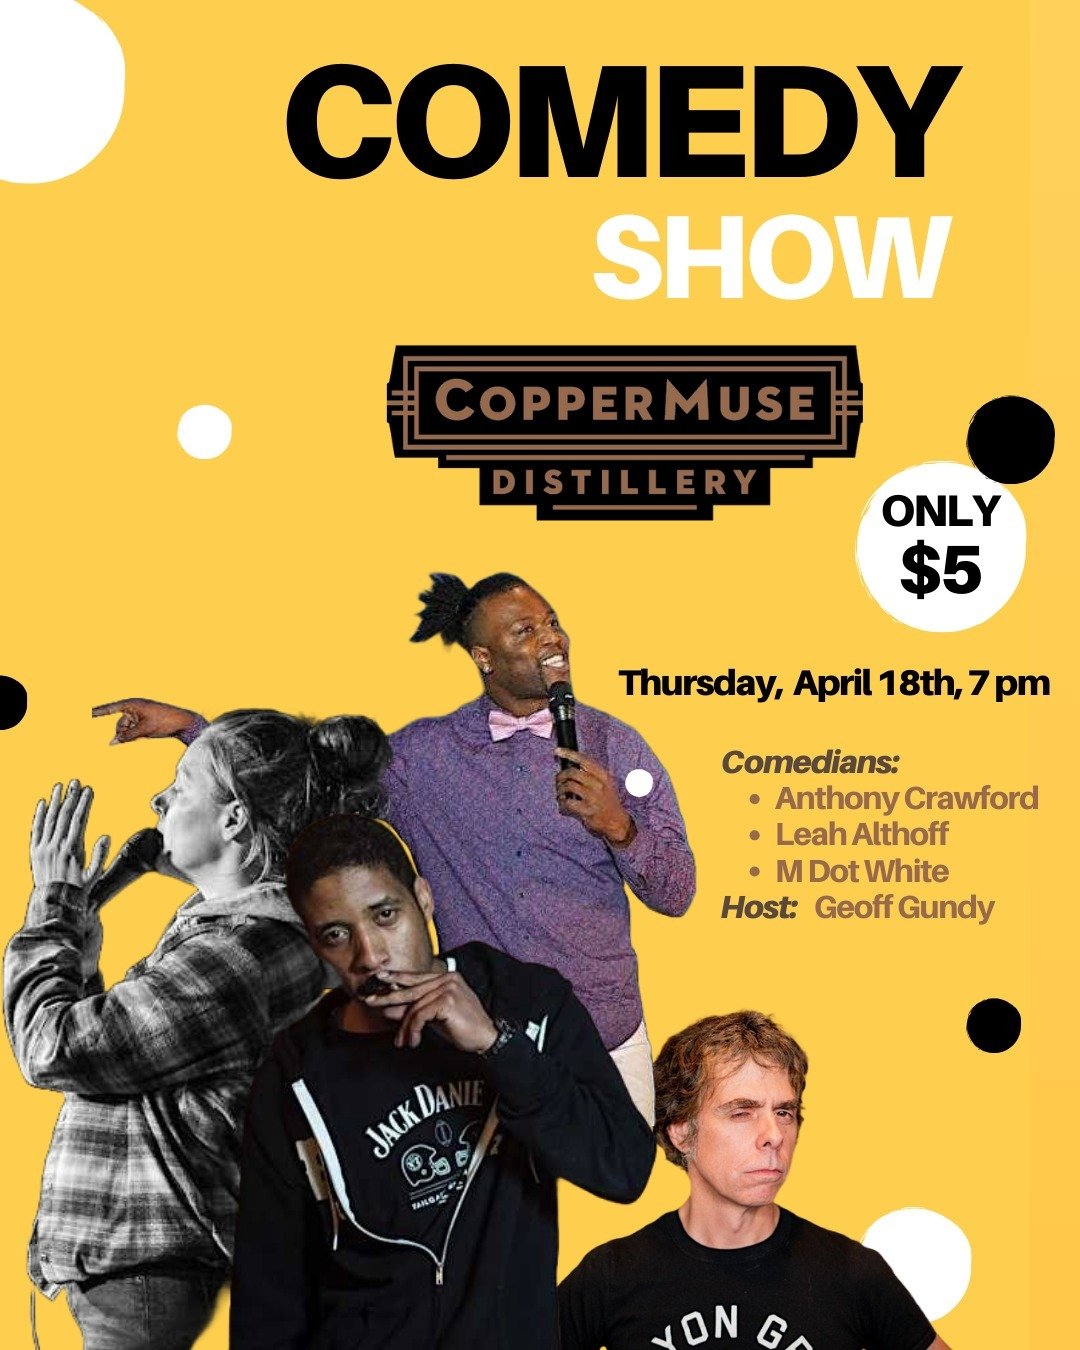 Join us at 7pm April 18th for some laughs and libations!

Tickets are just $5!⤵️

https://checkout.square.site/buy/EEHSAIAMKSL25ZFAQN3HY3D6